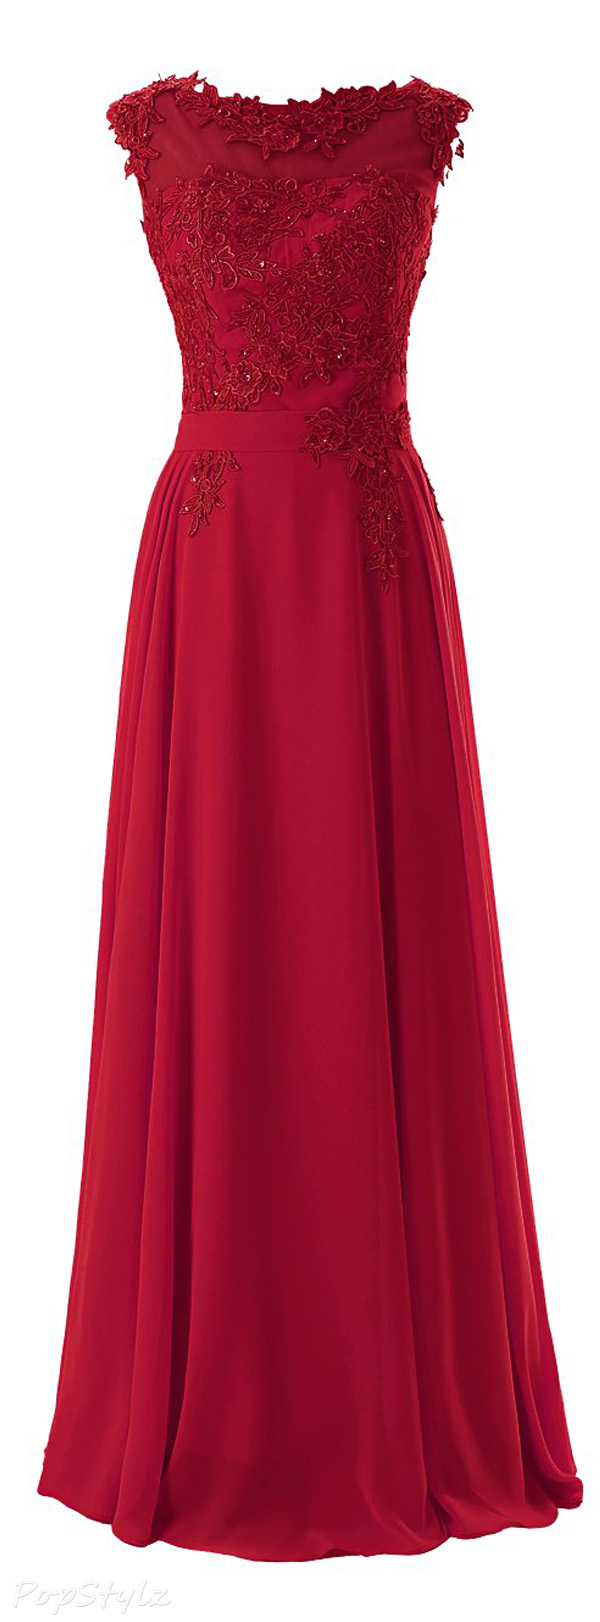 Diyouth Appliqued Chiffon Long Evening Gown